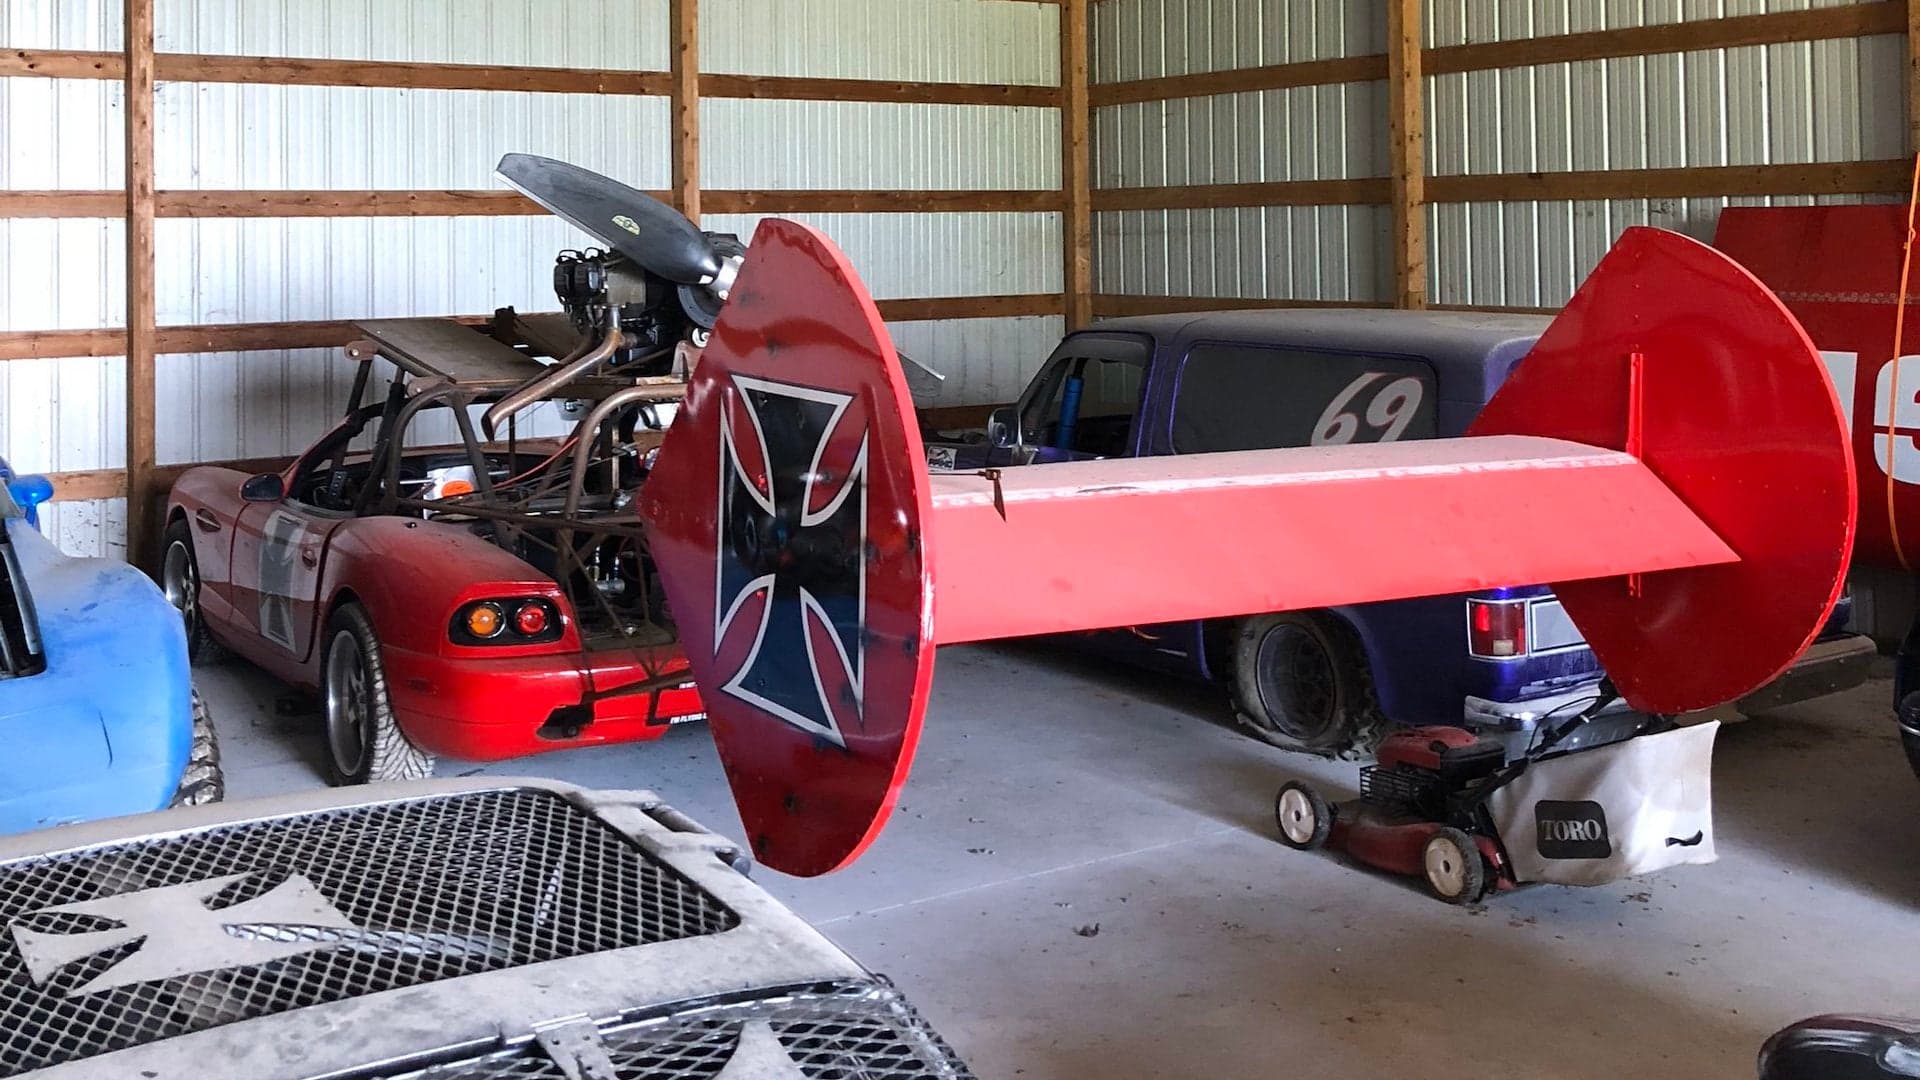 Flying Panoz, Donut-Maker Ford Crown Vic From Monster Garage TV Show Surface for Sale